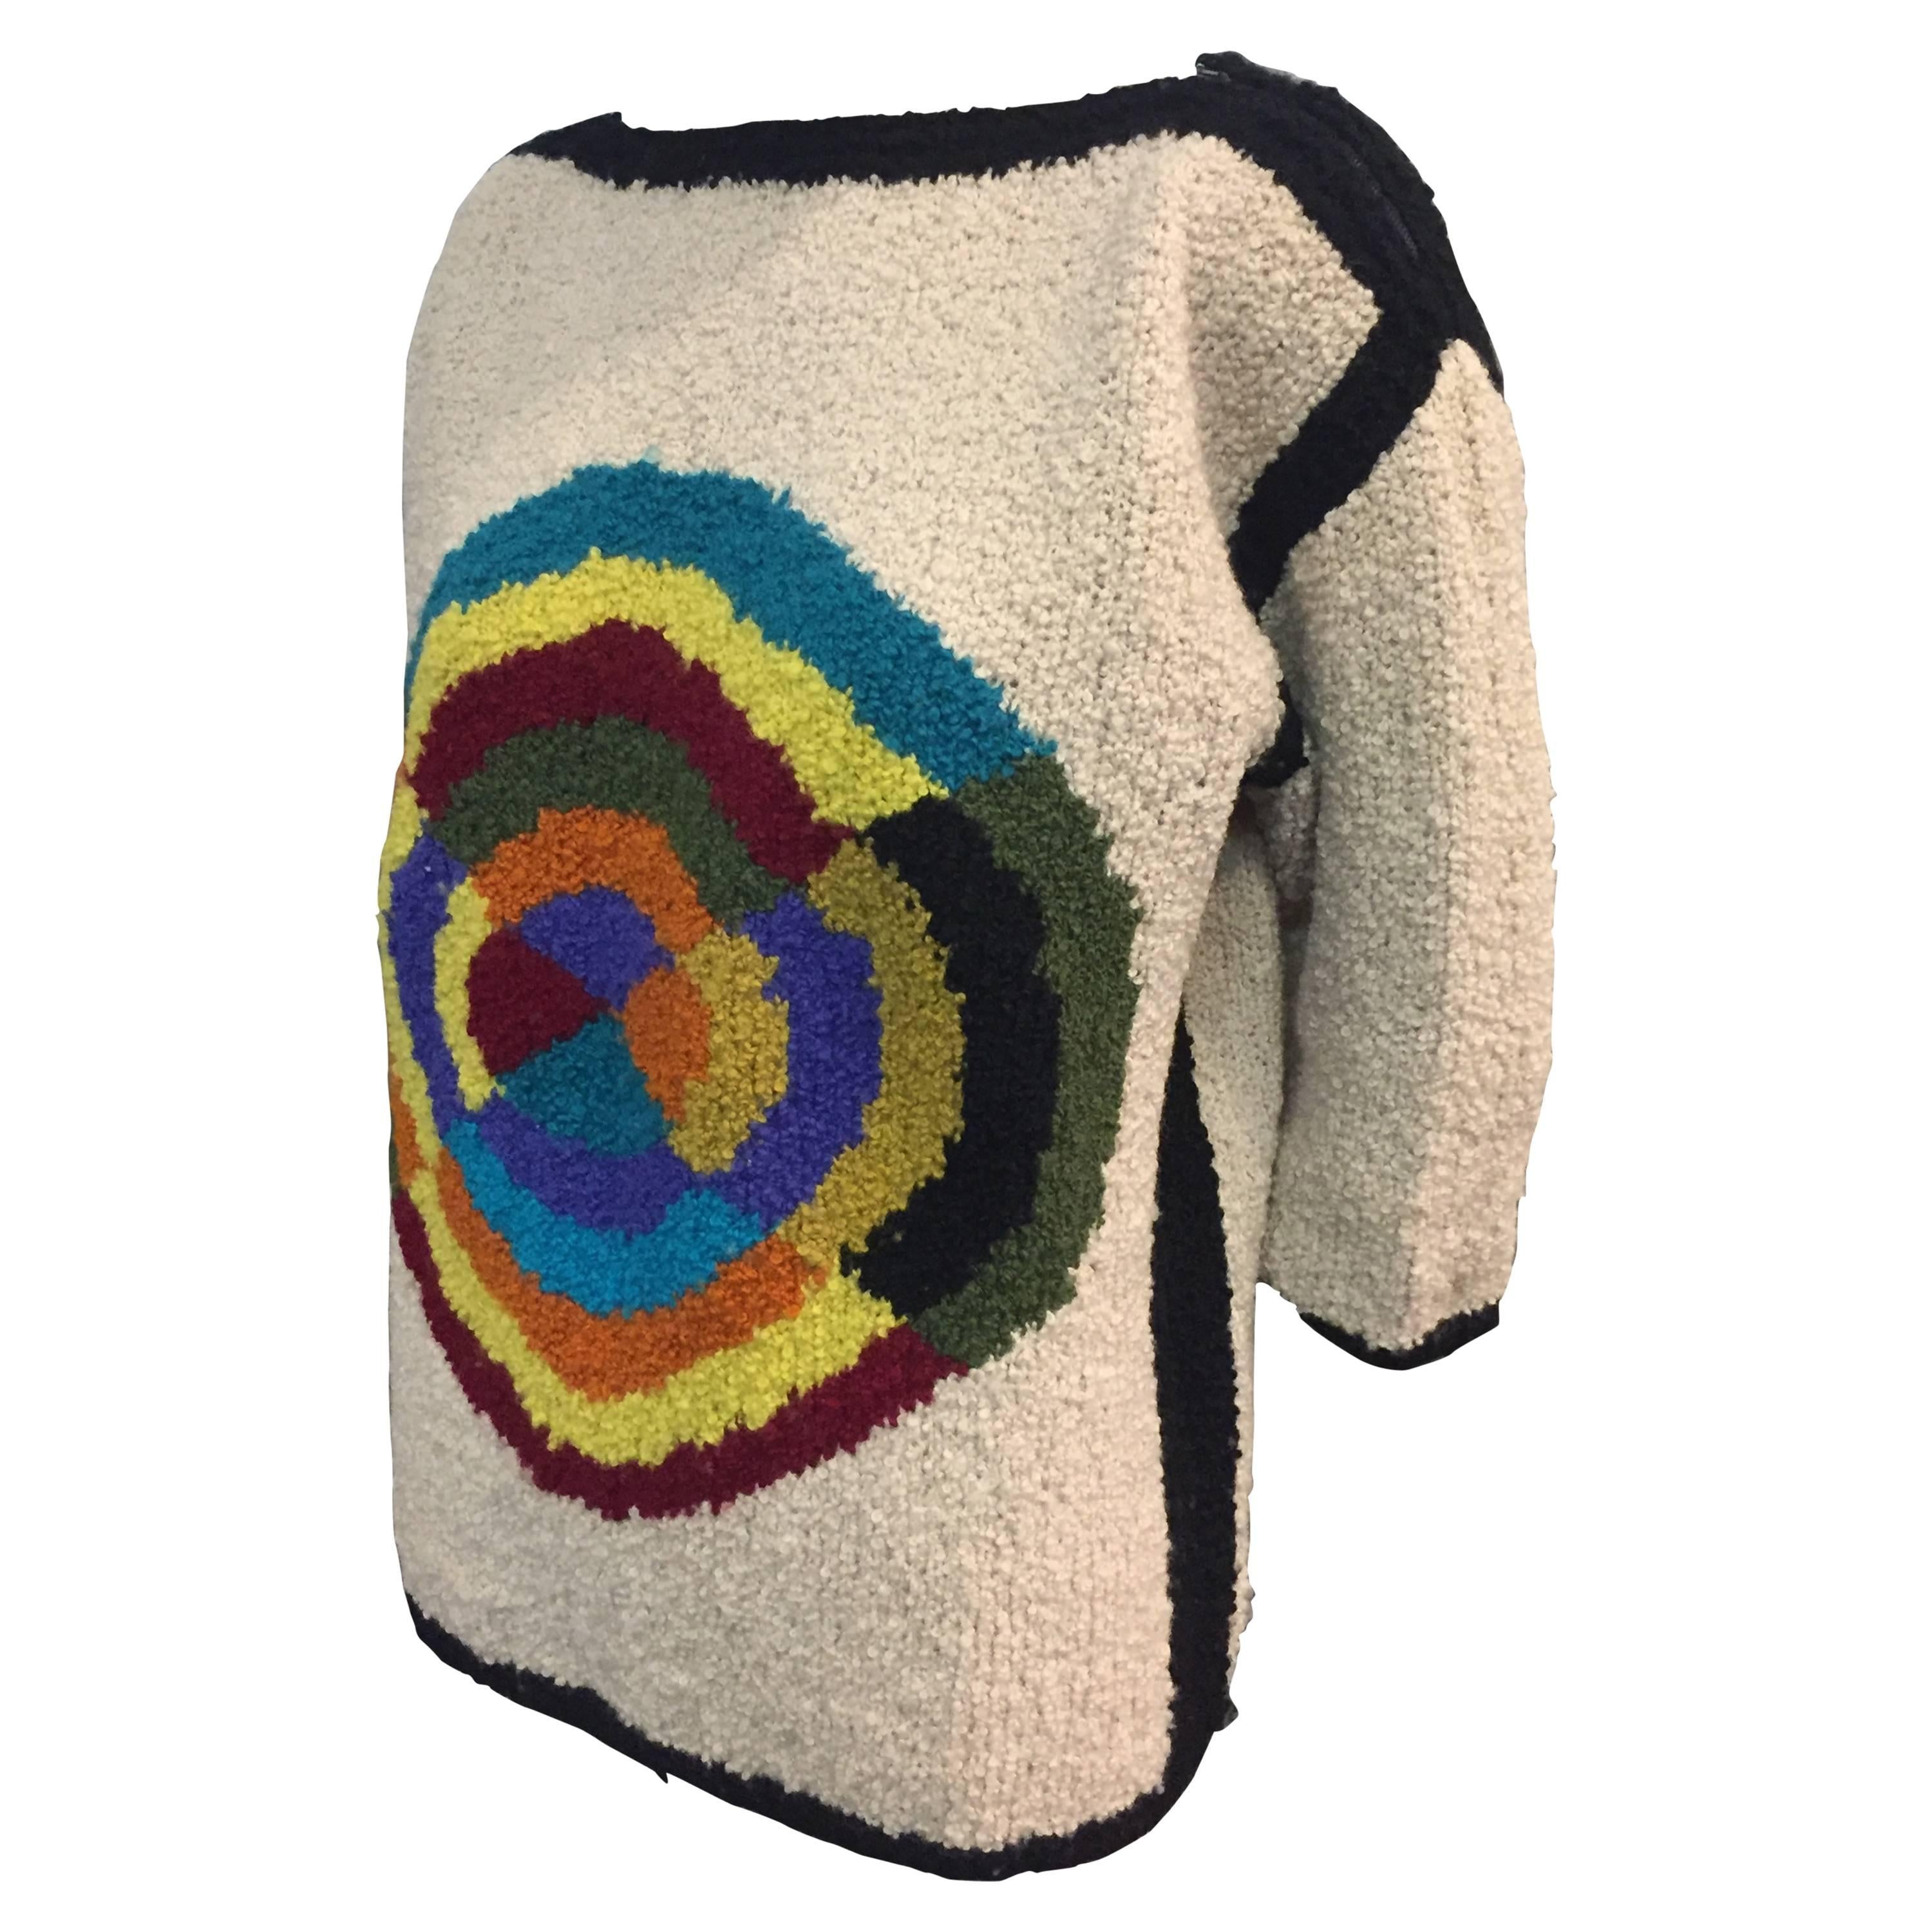 1960's Italian Hand-Knit Sweater W/ Colorful Abstract Design 